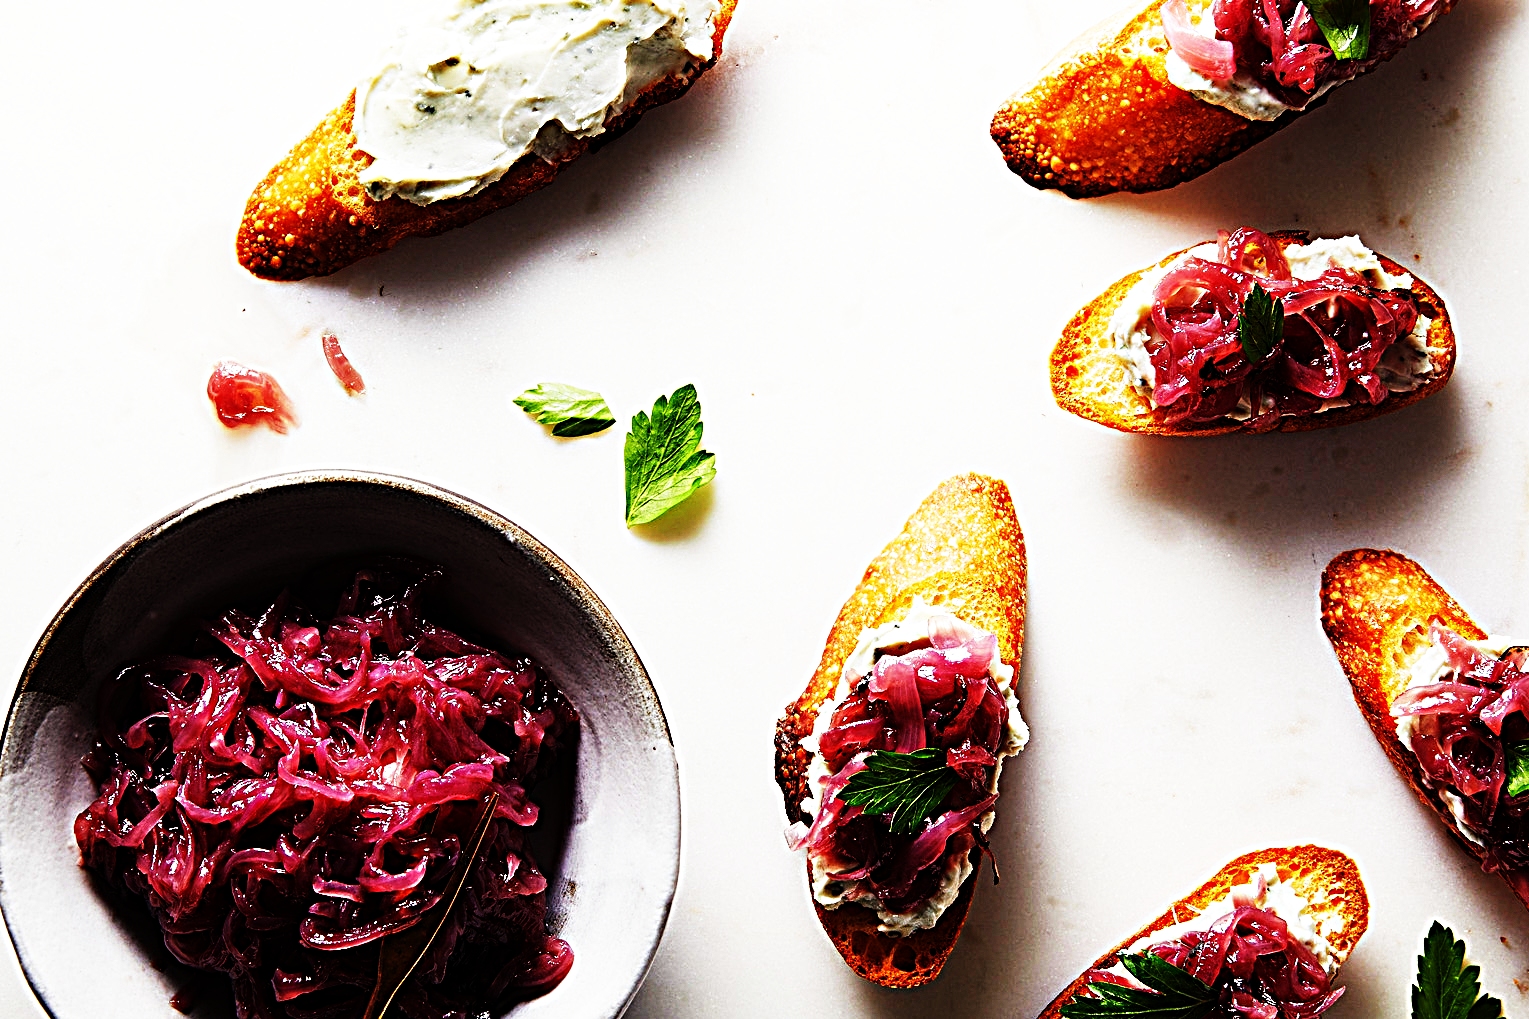 Stupid-Easy Recipe for Creamy Blue Cheese and Red Onion Crostini (#1 Top-Rated)